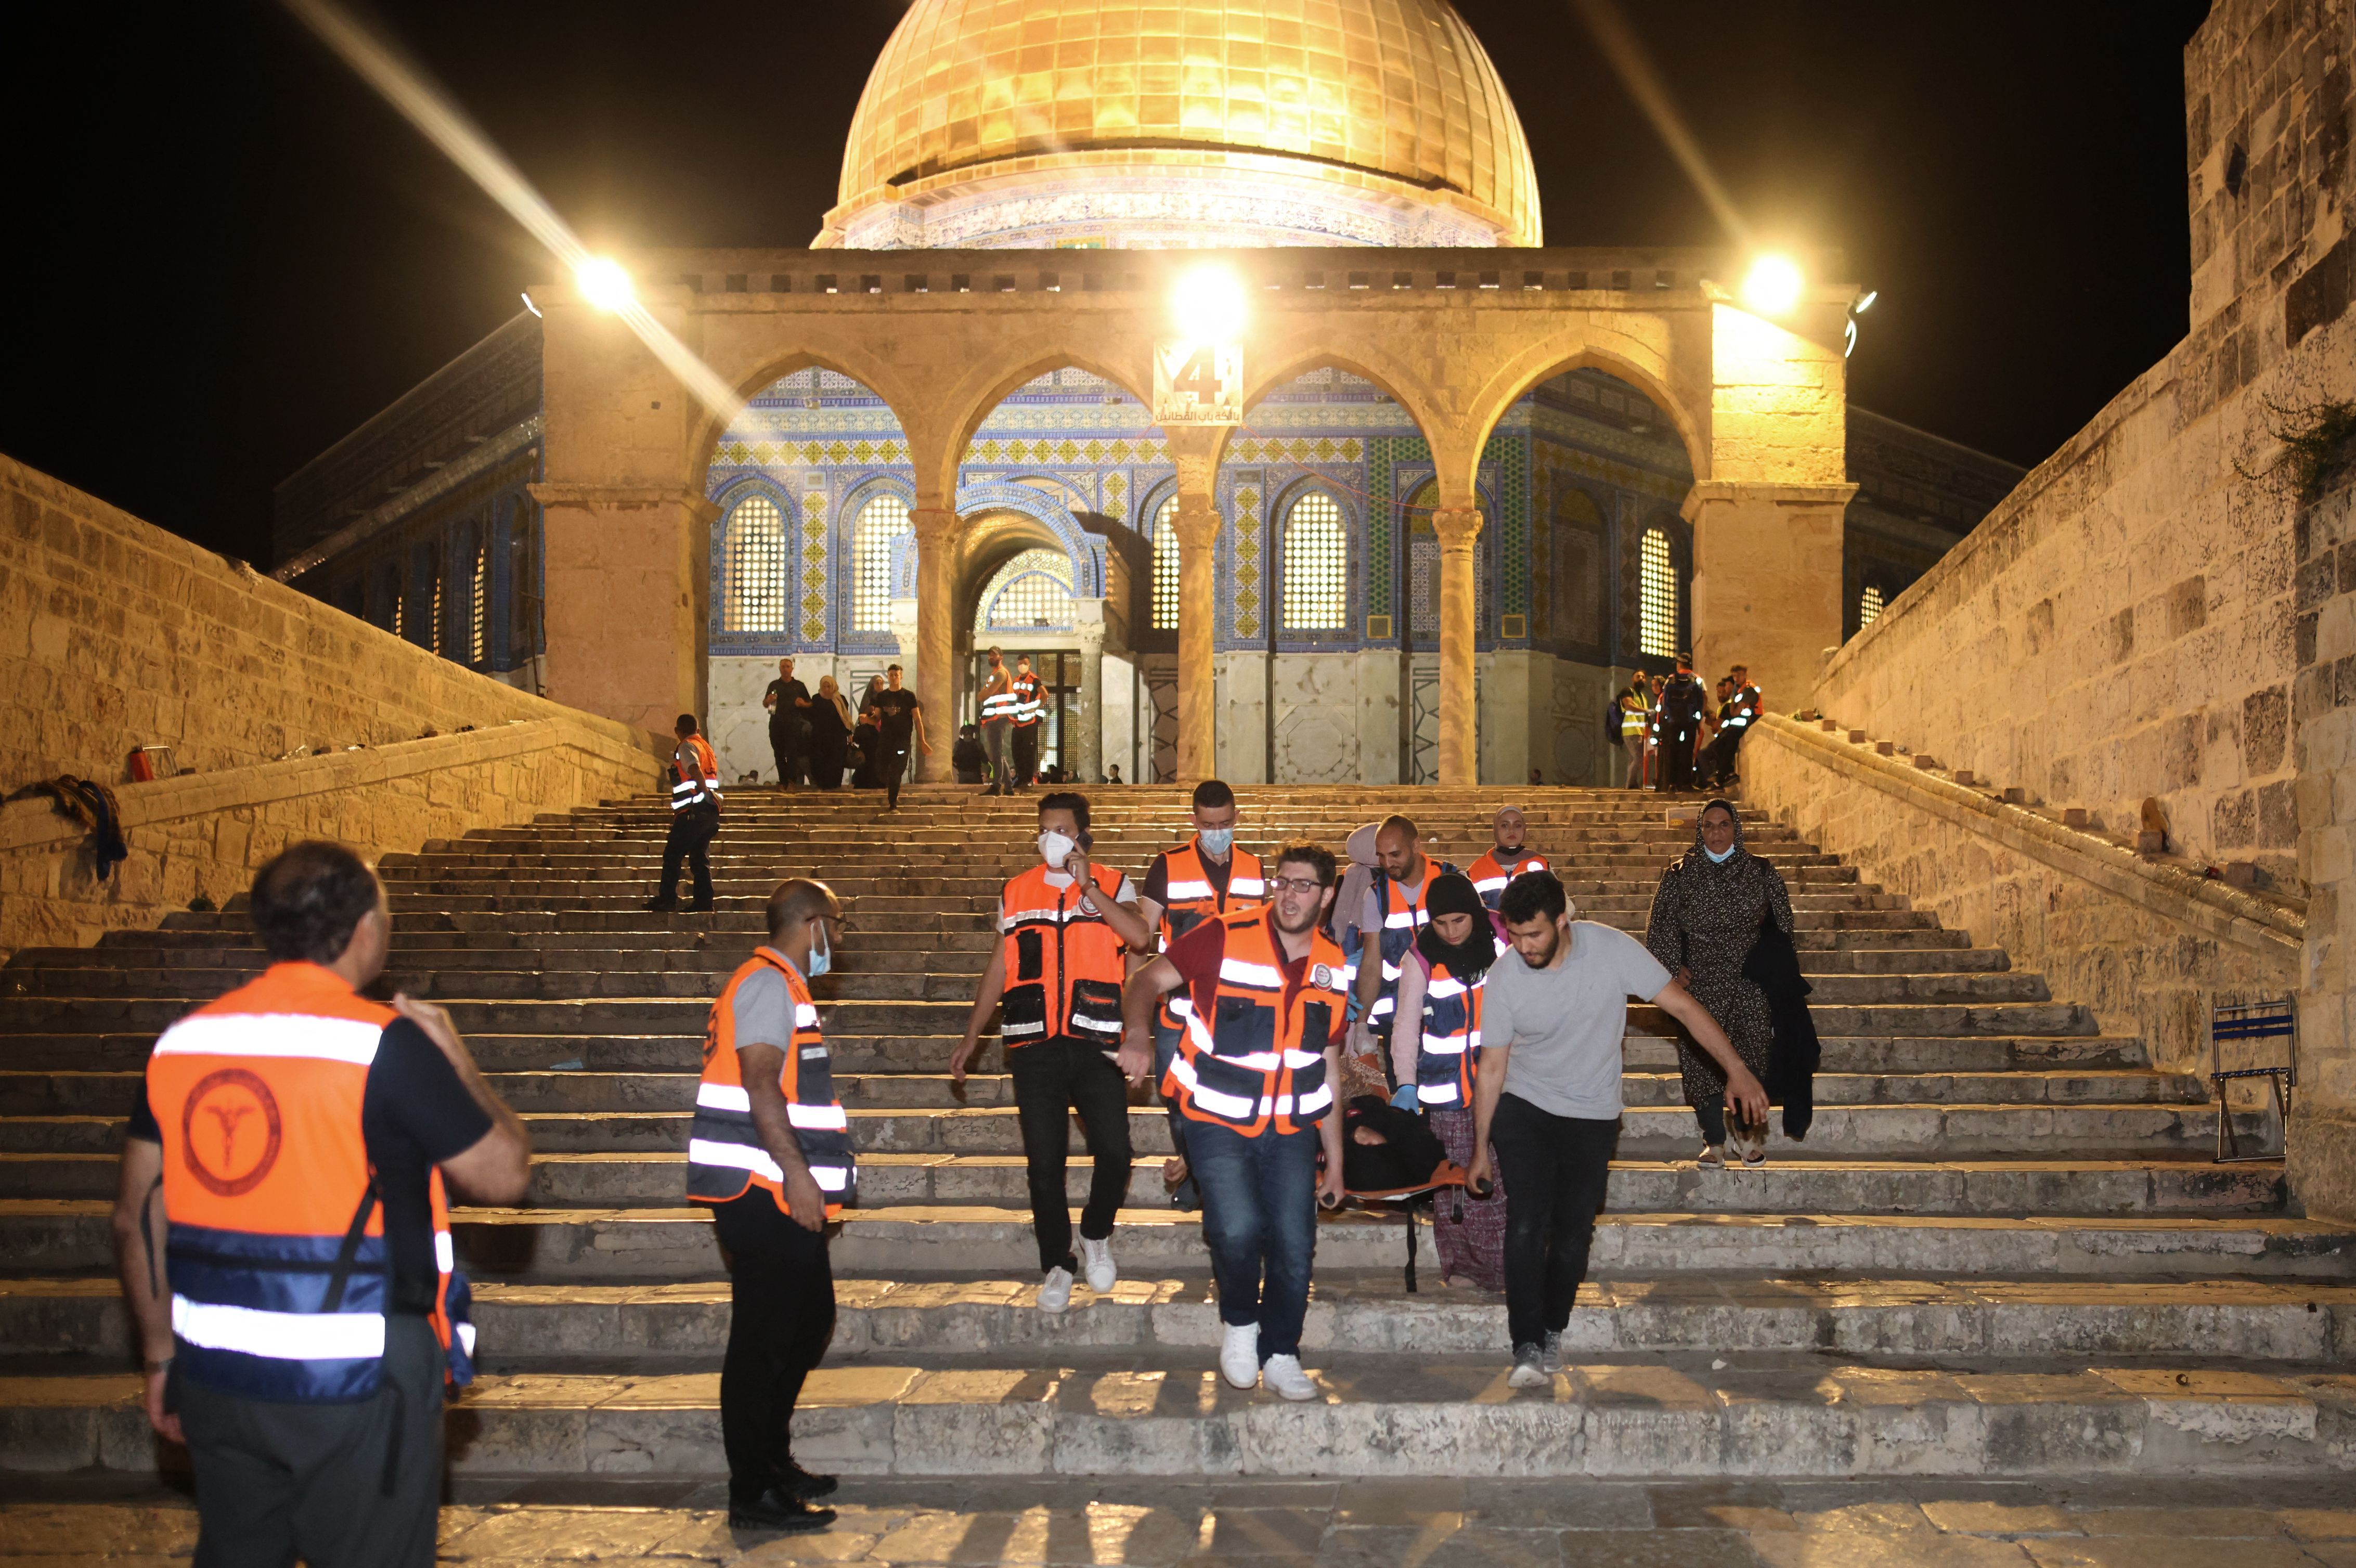 Palestinian medics evacuate a wounded person during clashes between Israeli security forces and Palestinian protestors in Jerusalem's al-Aqsa mosque compound on May 10